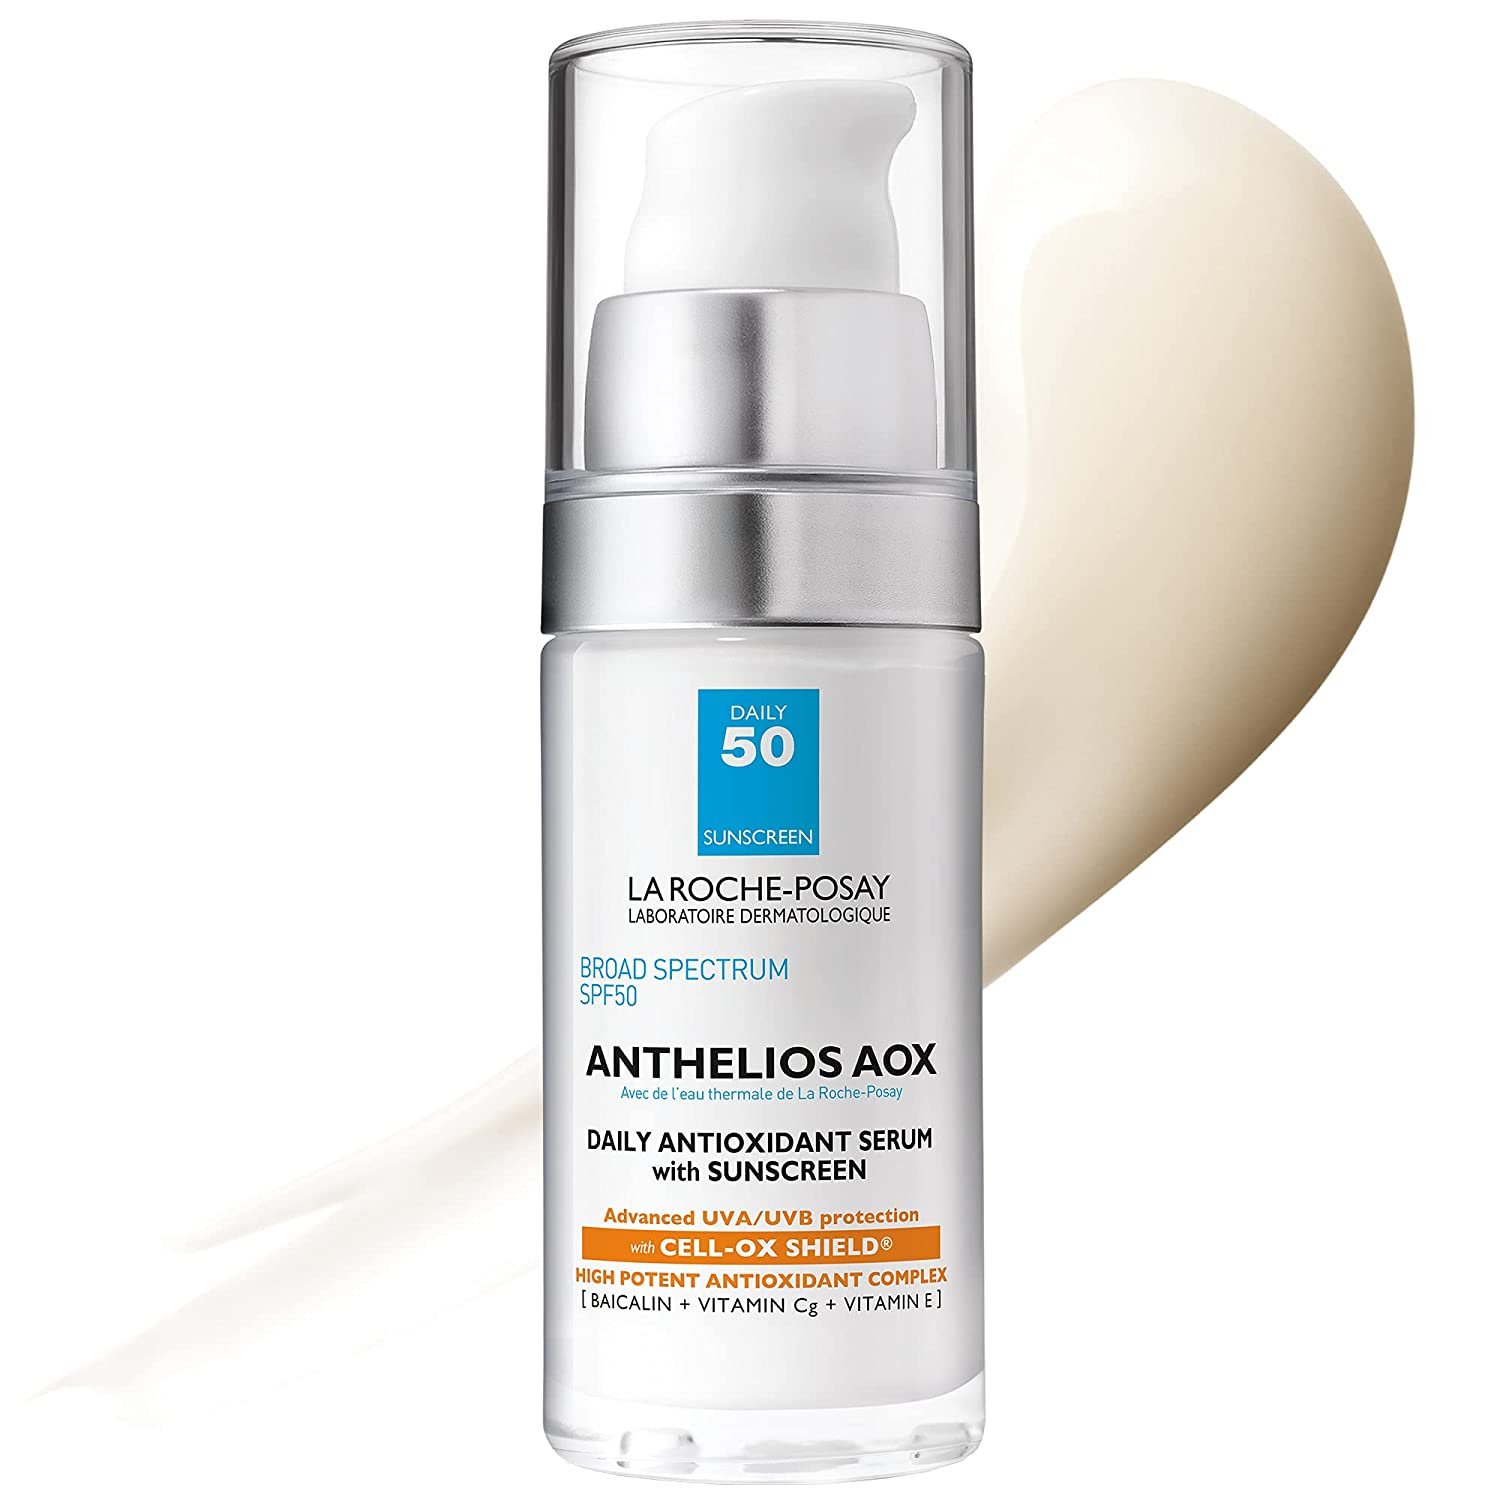 La Roche-Posay Anthelios AOX Daily Antioxidant Serum with SPF